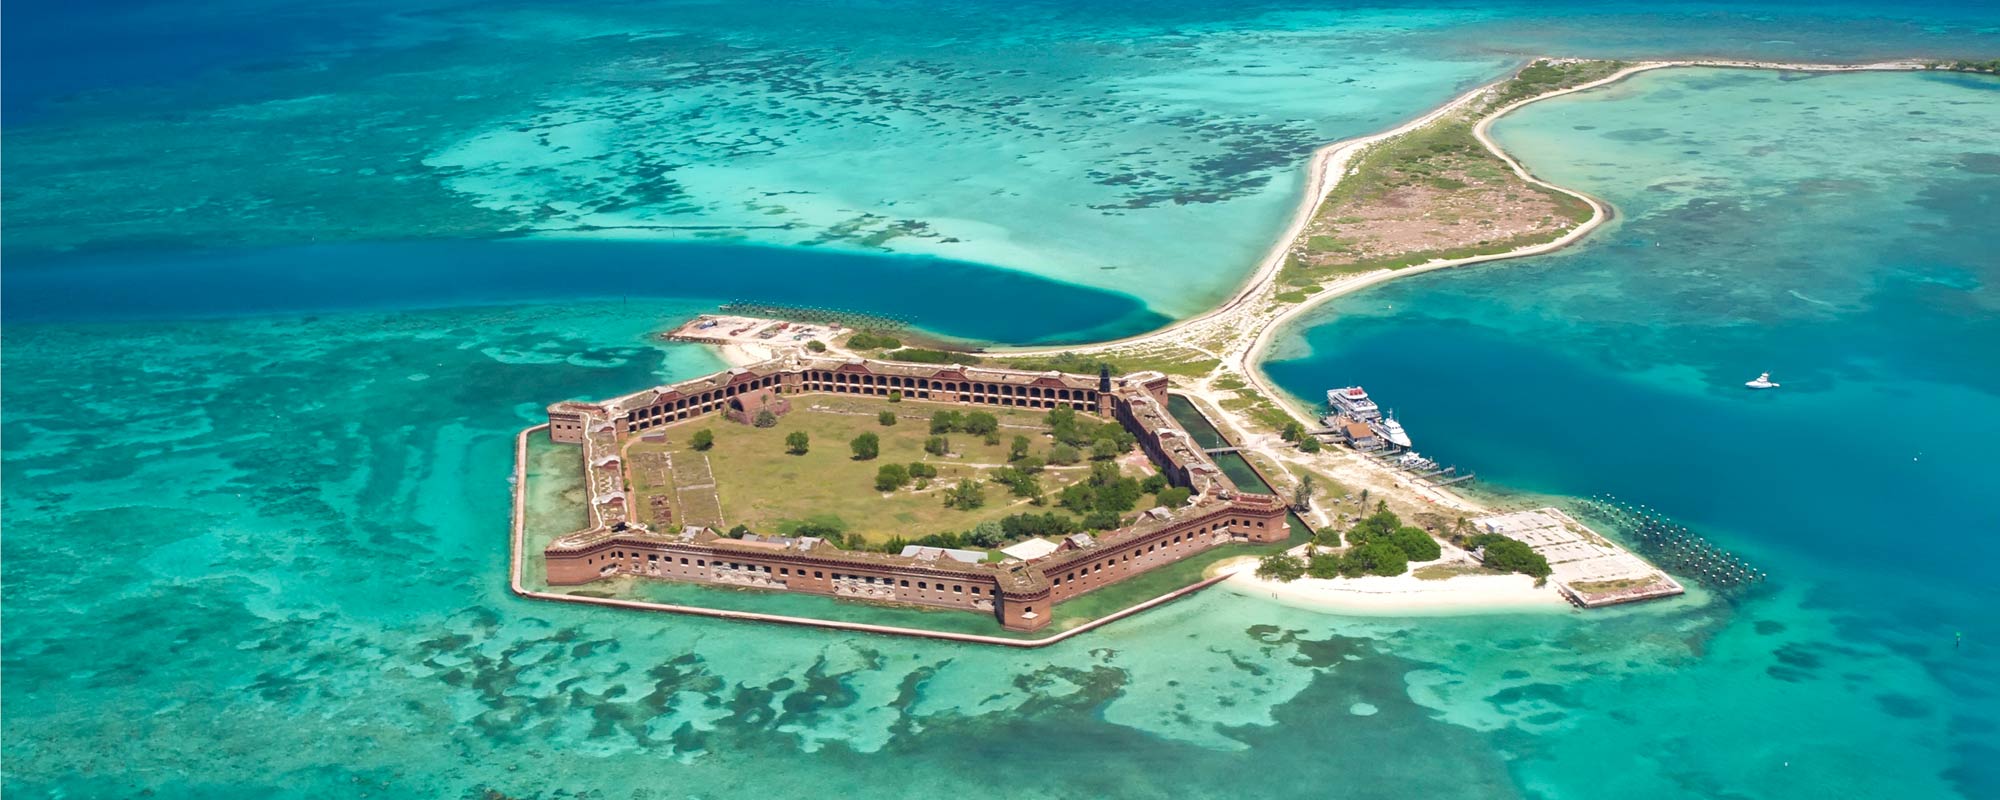 Dry Tortugas National Park Ariel View